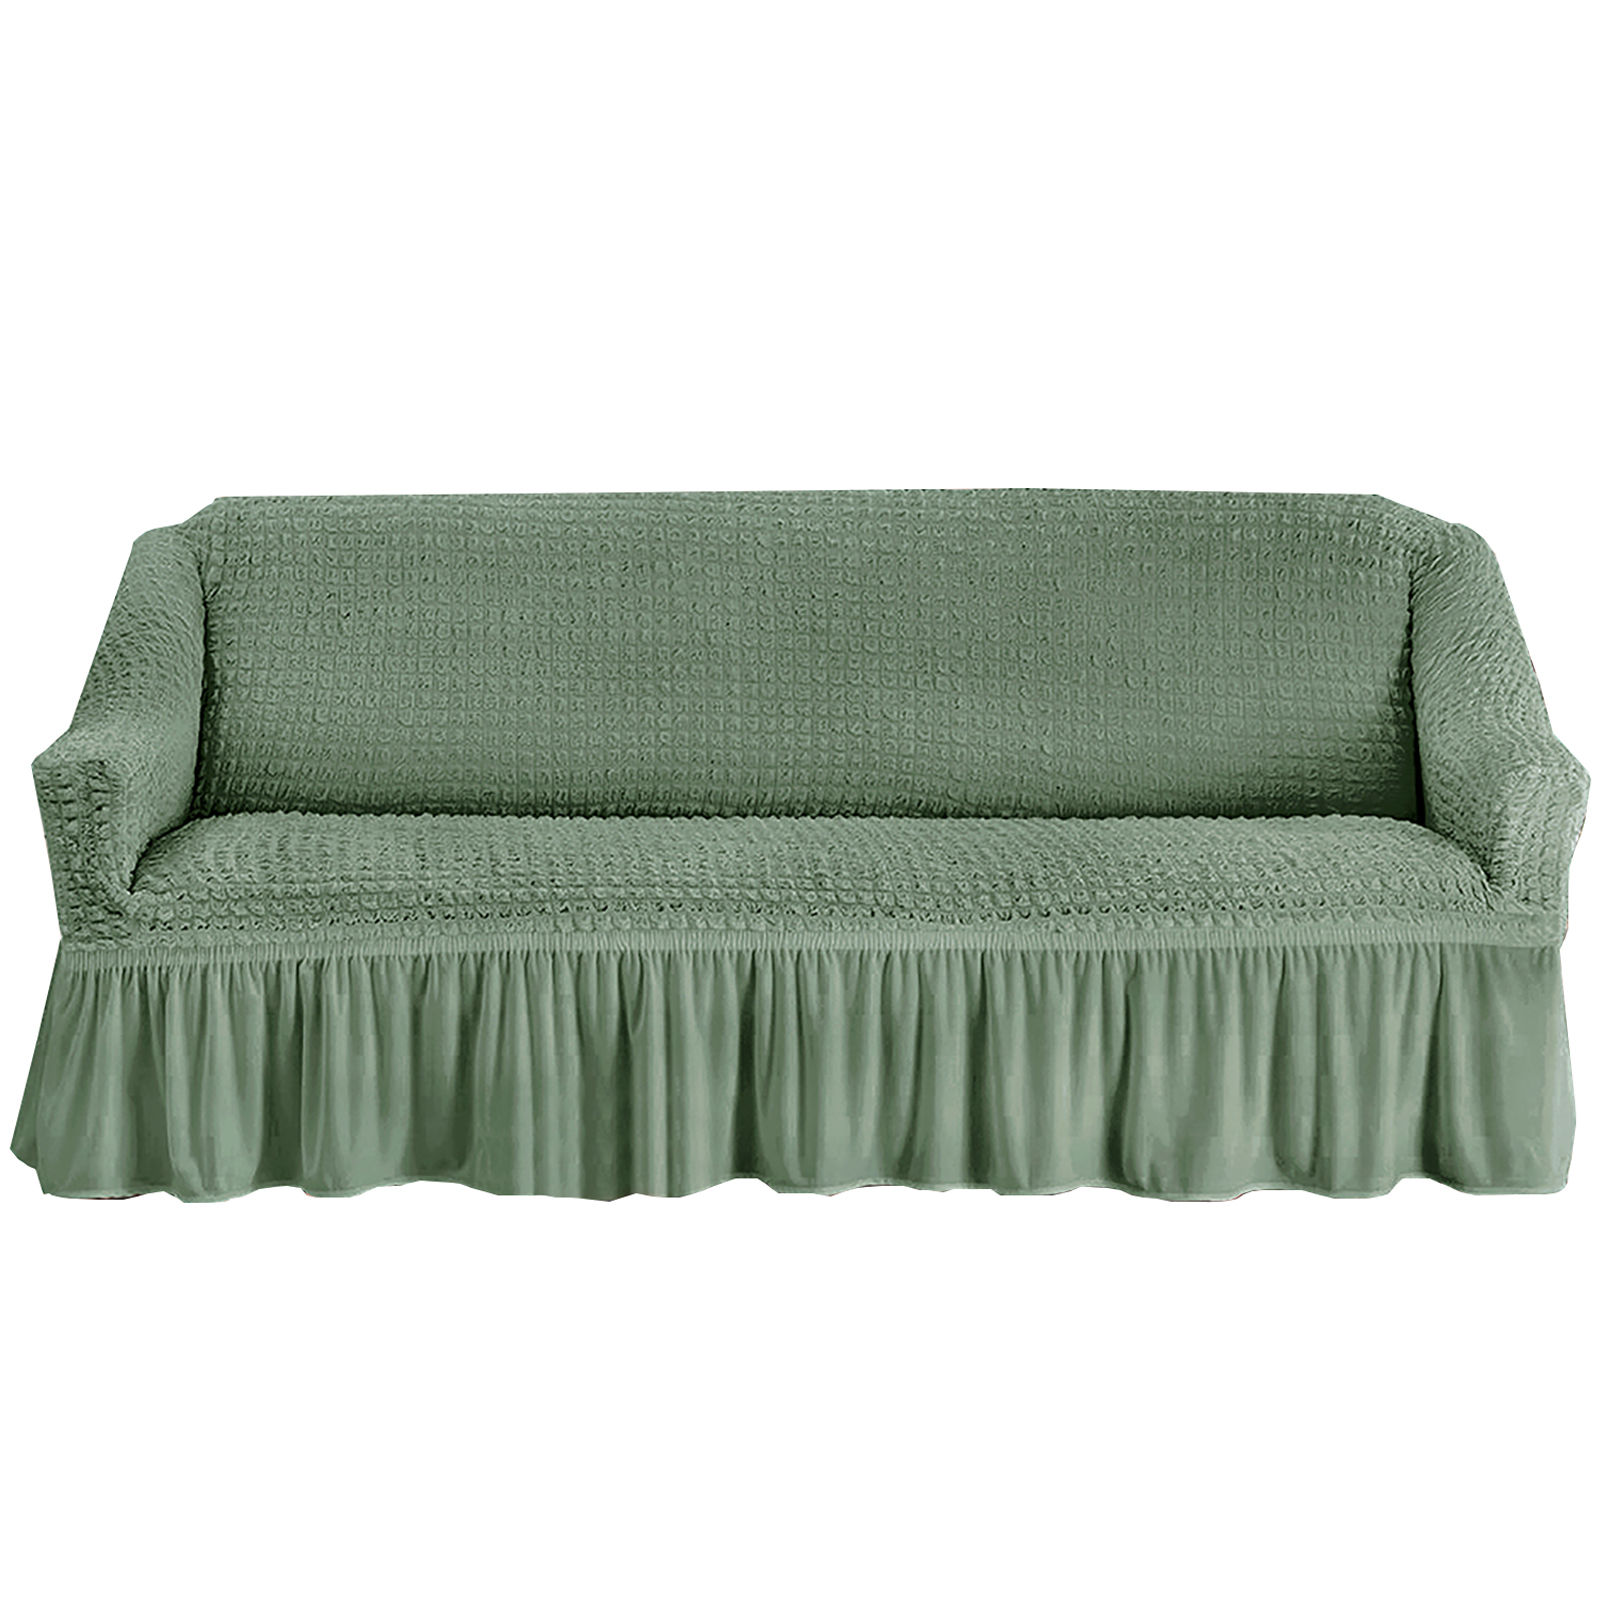 Stretch Sofa Slipcover, 3 Seater Sofa Slipcovers With Skirt With Armless Soft Sofa Cover Elastic Straps Sofa Slipcover For Living Room Kids Pets-Green B-Small